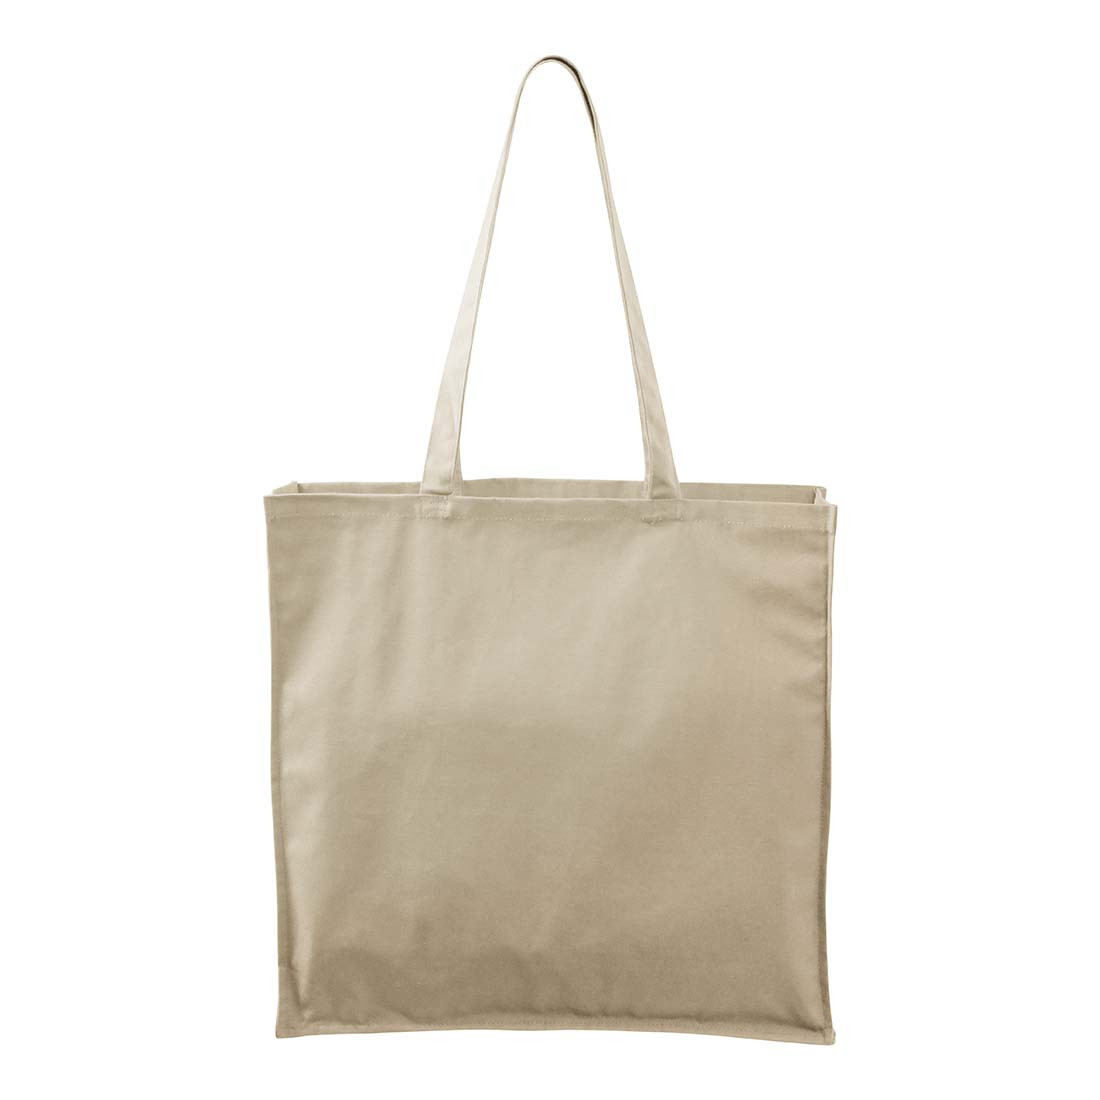 CARRY Shopping Bag - Technical